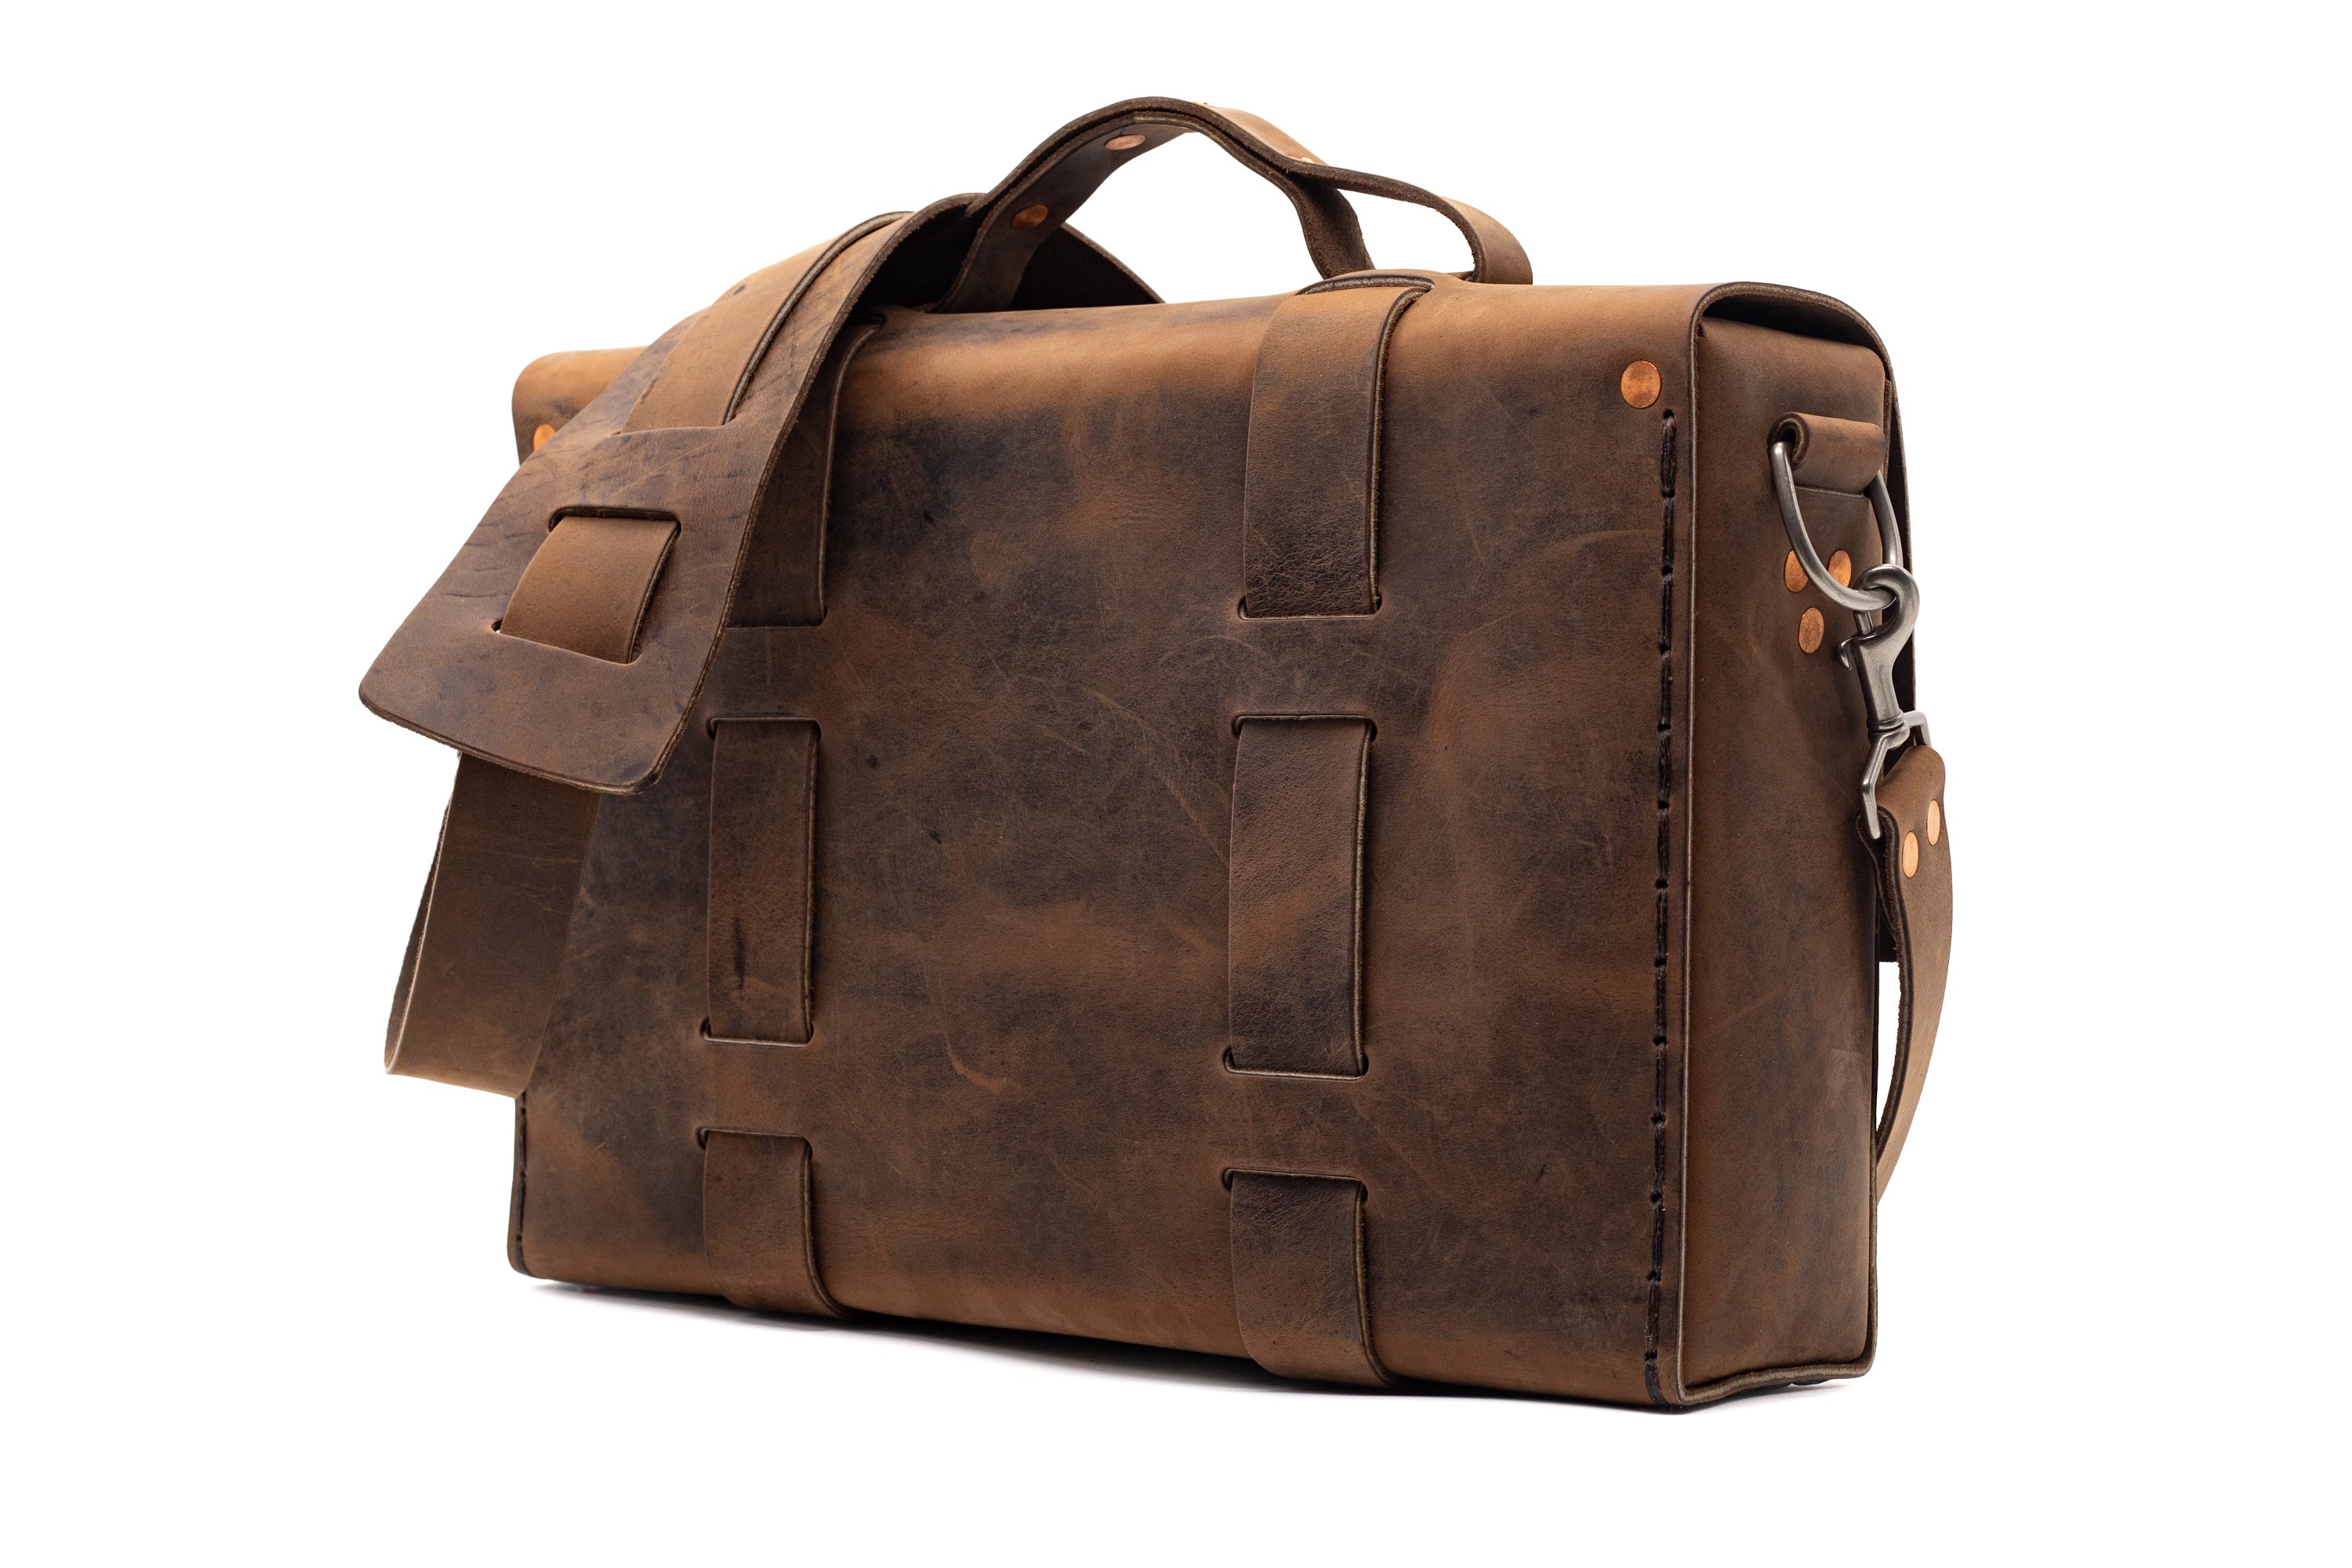 LIMITED EDITION NO. 4313 MINIMALIST STANDARD LEATHER SATCHEL IN CHANTILLY BROWN - ONLY 6 MADE